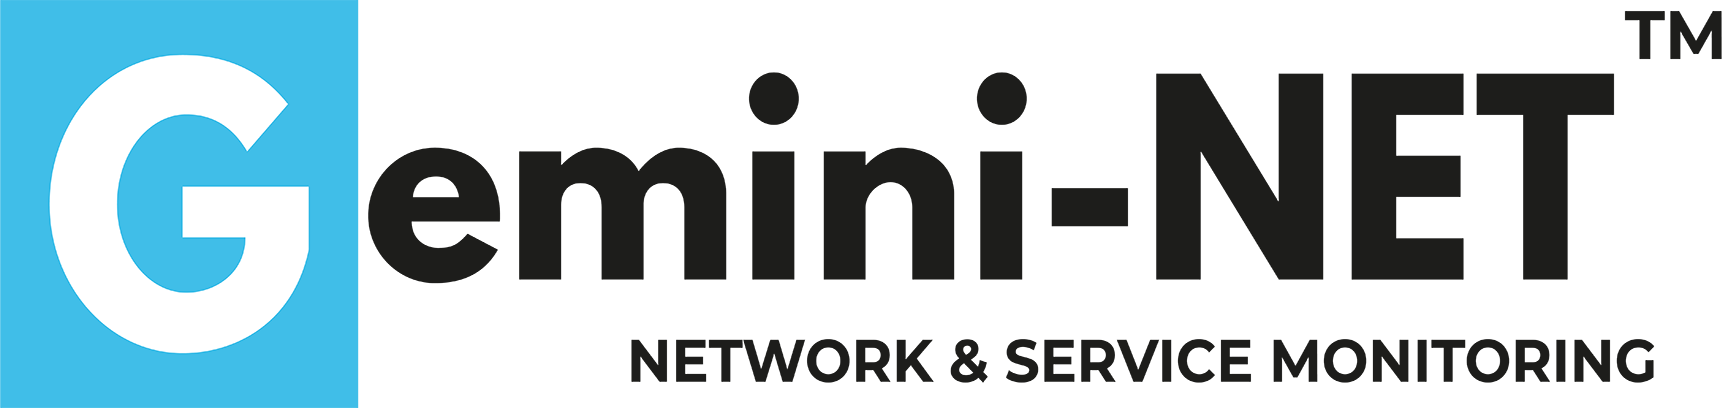 Gemini - end-to-end monitoring of networks and communication services | Resi Informatica